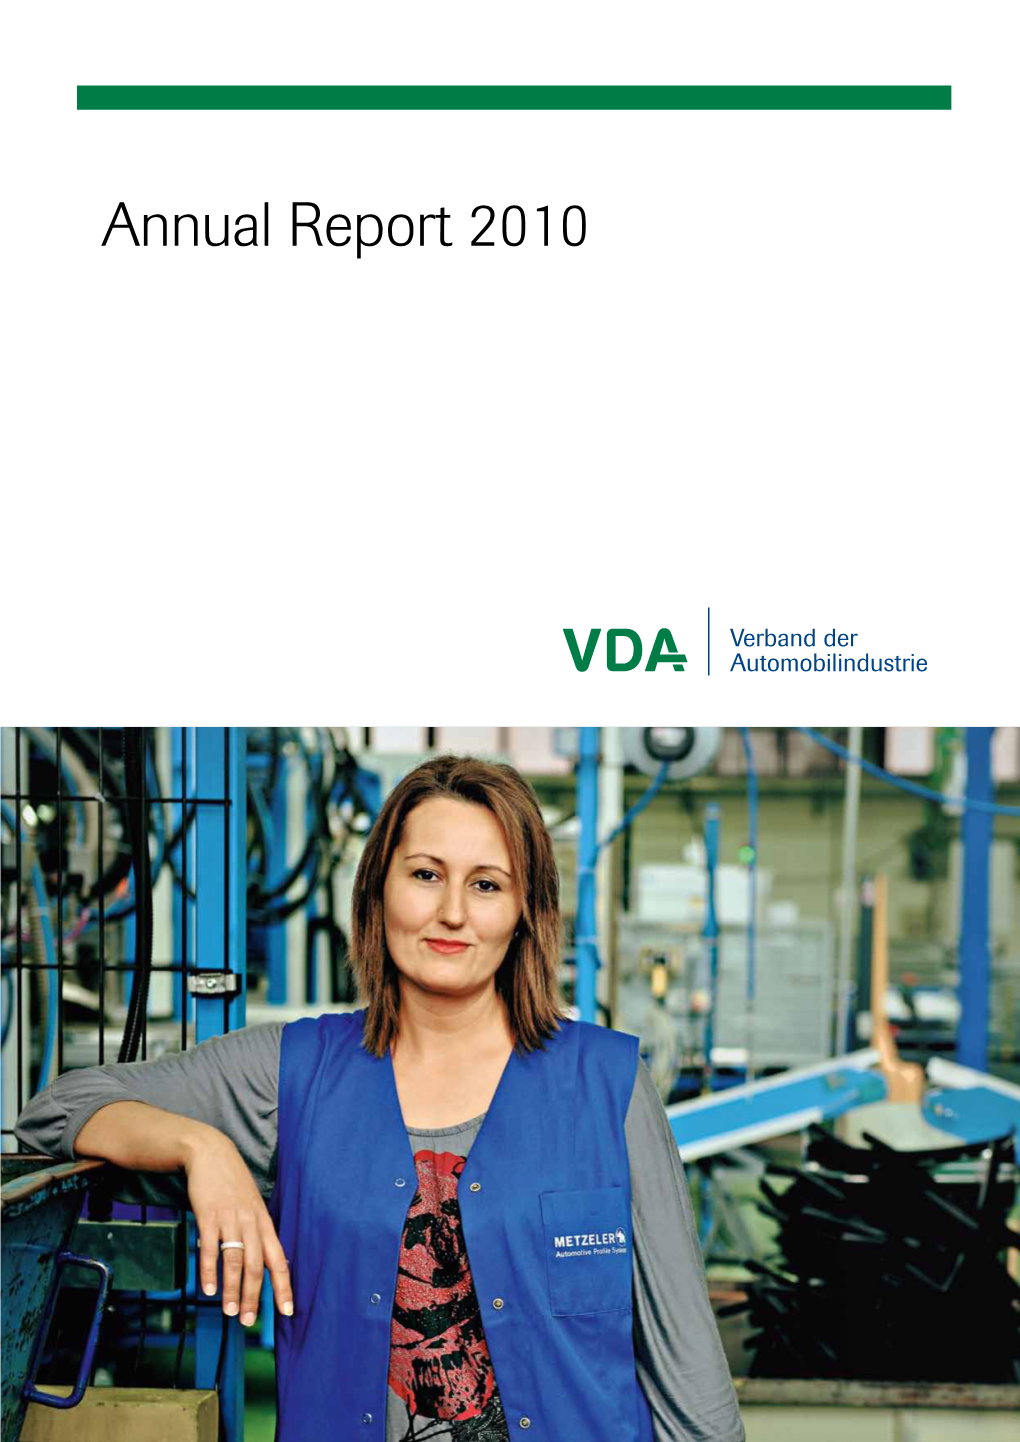 Download VDA QMC Books Via the QMC Portal, and Then Put These at the Disposal of Their Employees, in Addition to Manufacturers and Suppliers Via the Company Intranet